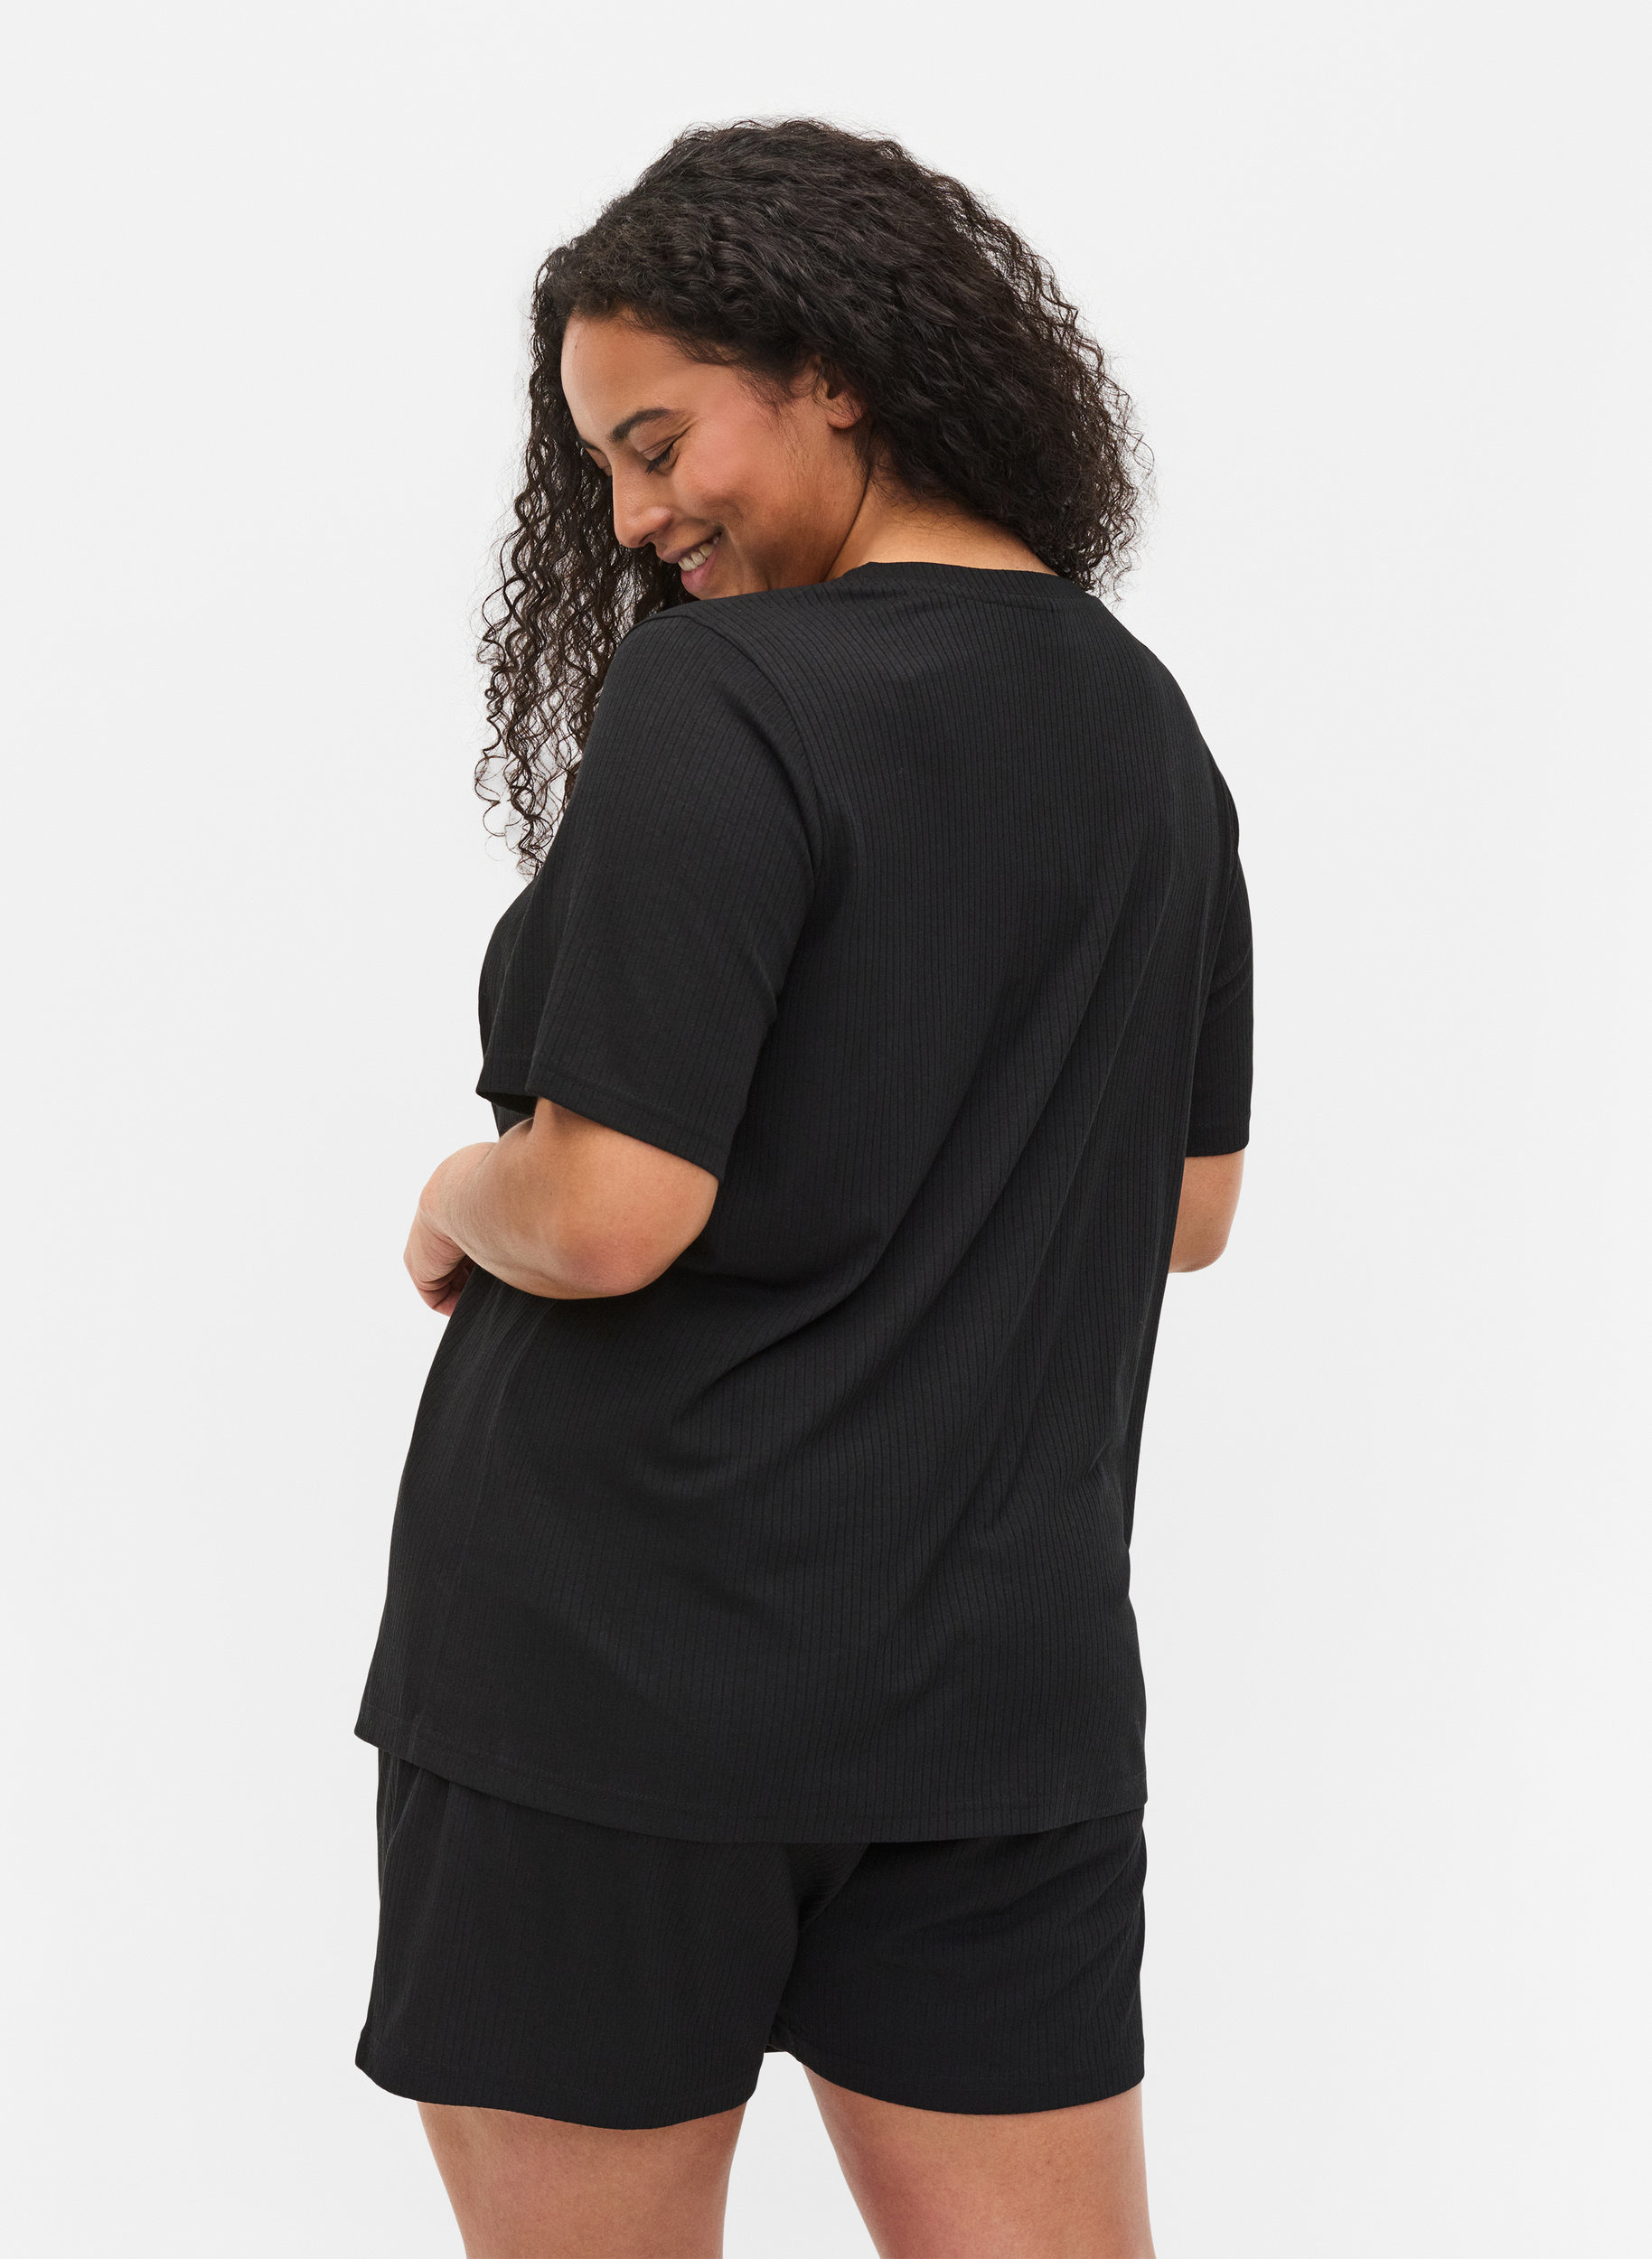 Short-sleeved t-shirt in ribbed fabric, Black, Model